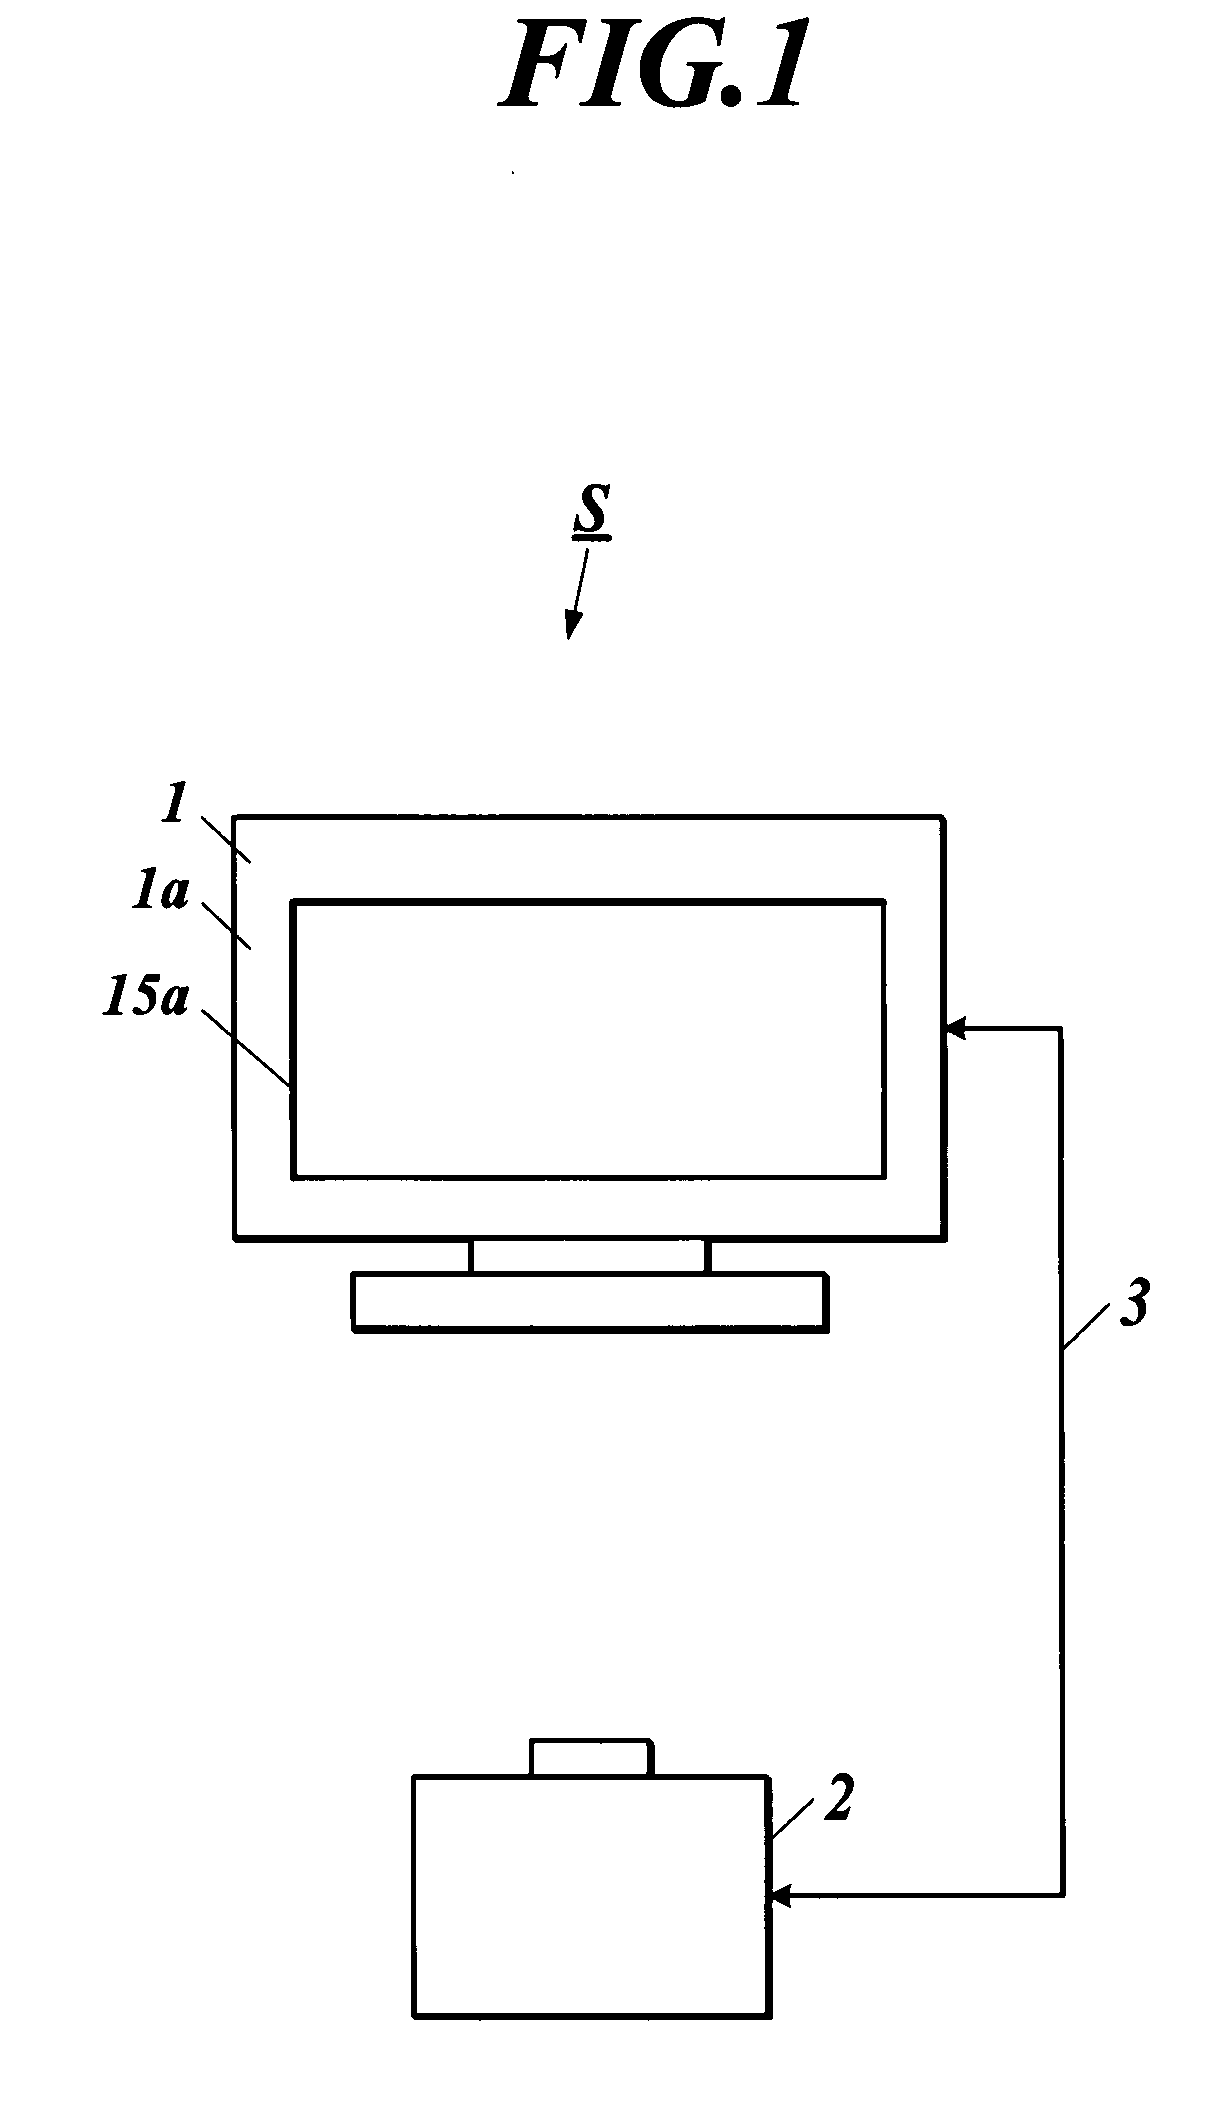 Display apparatus, burn-in correction system and burn-in correction method